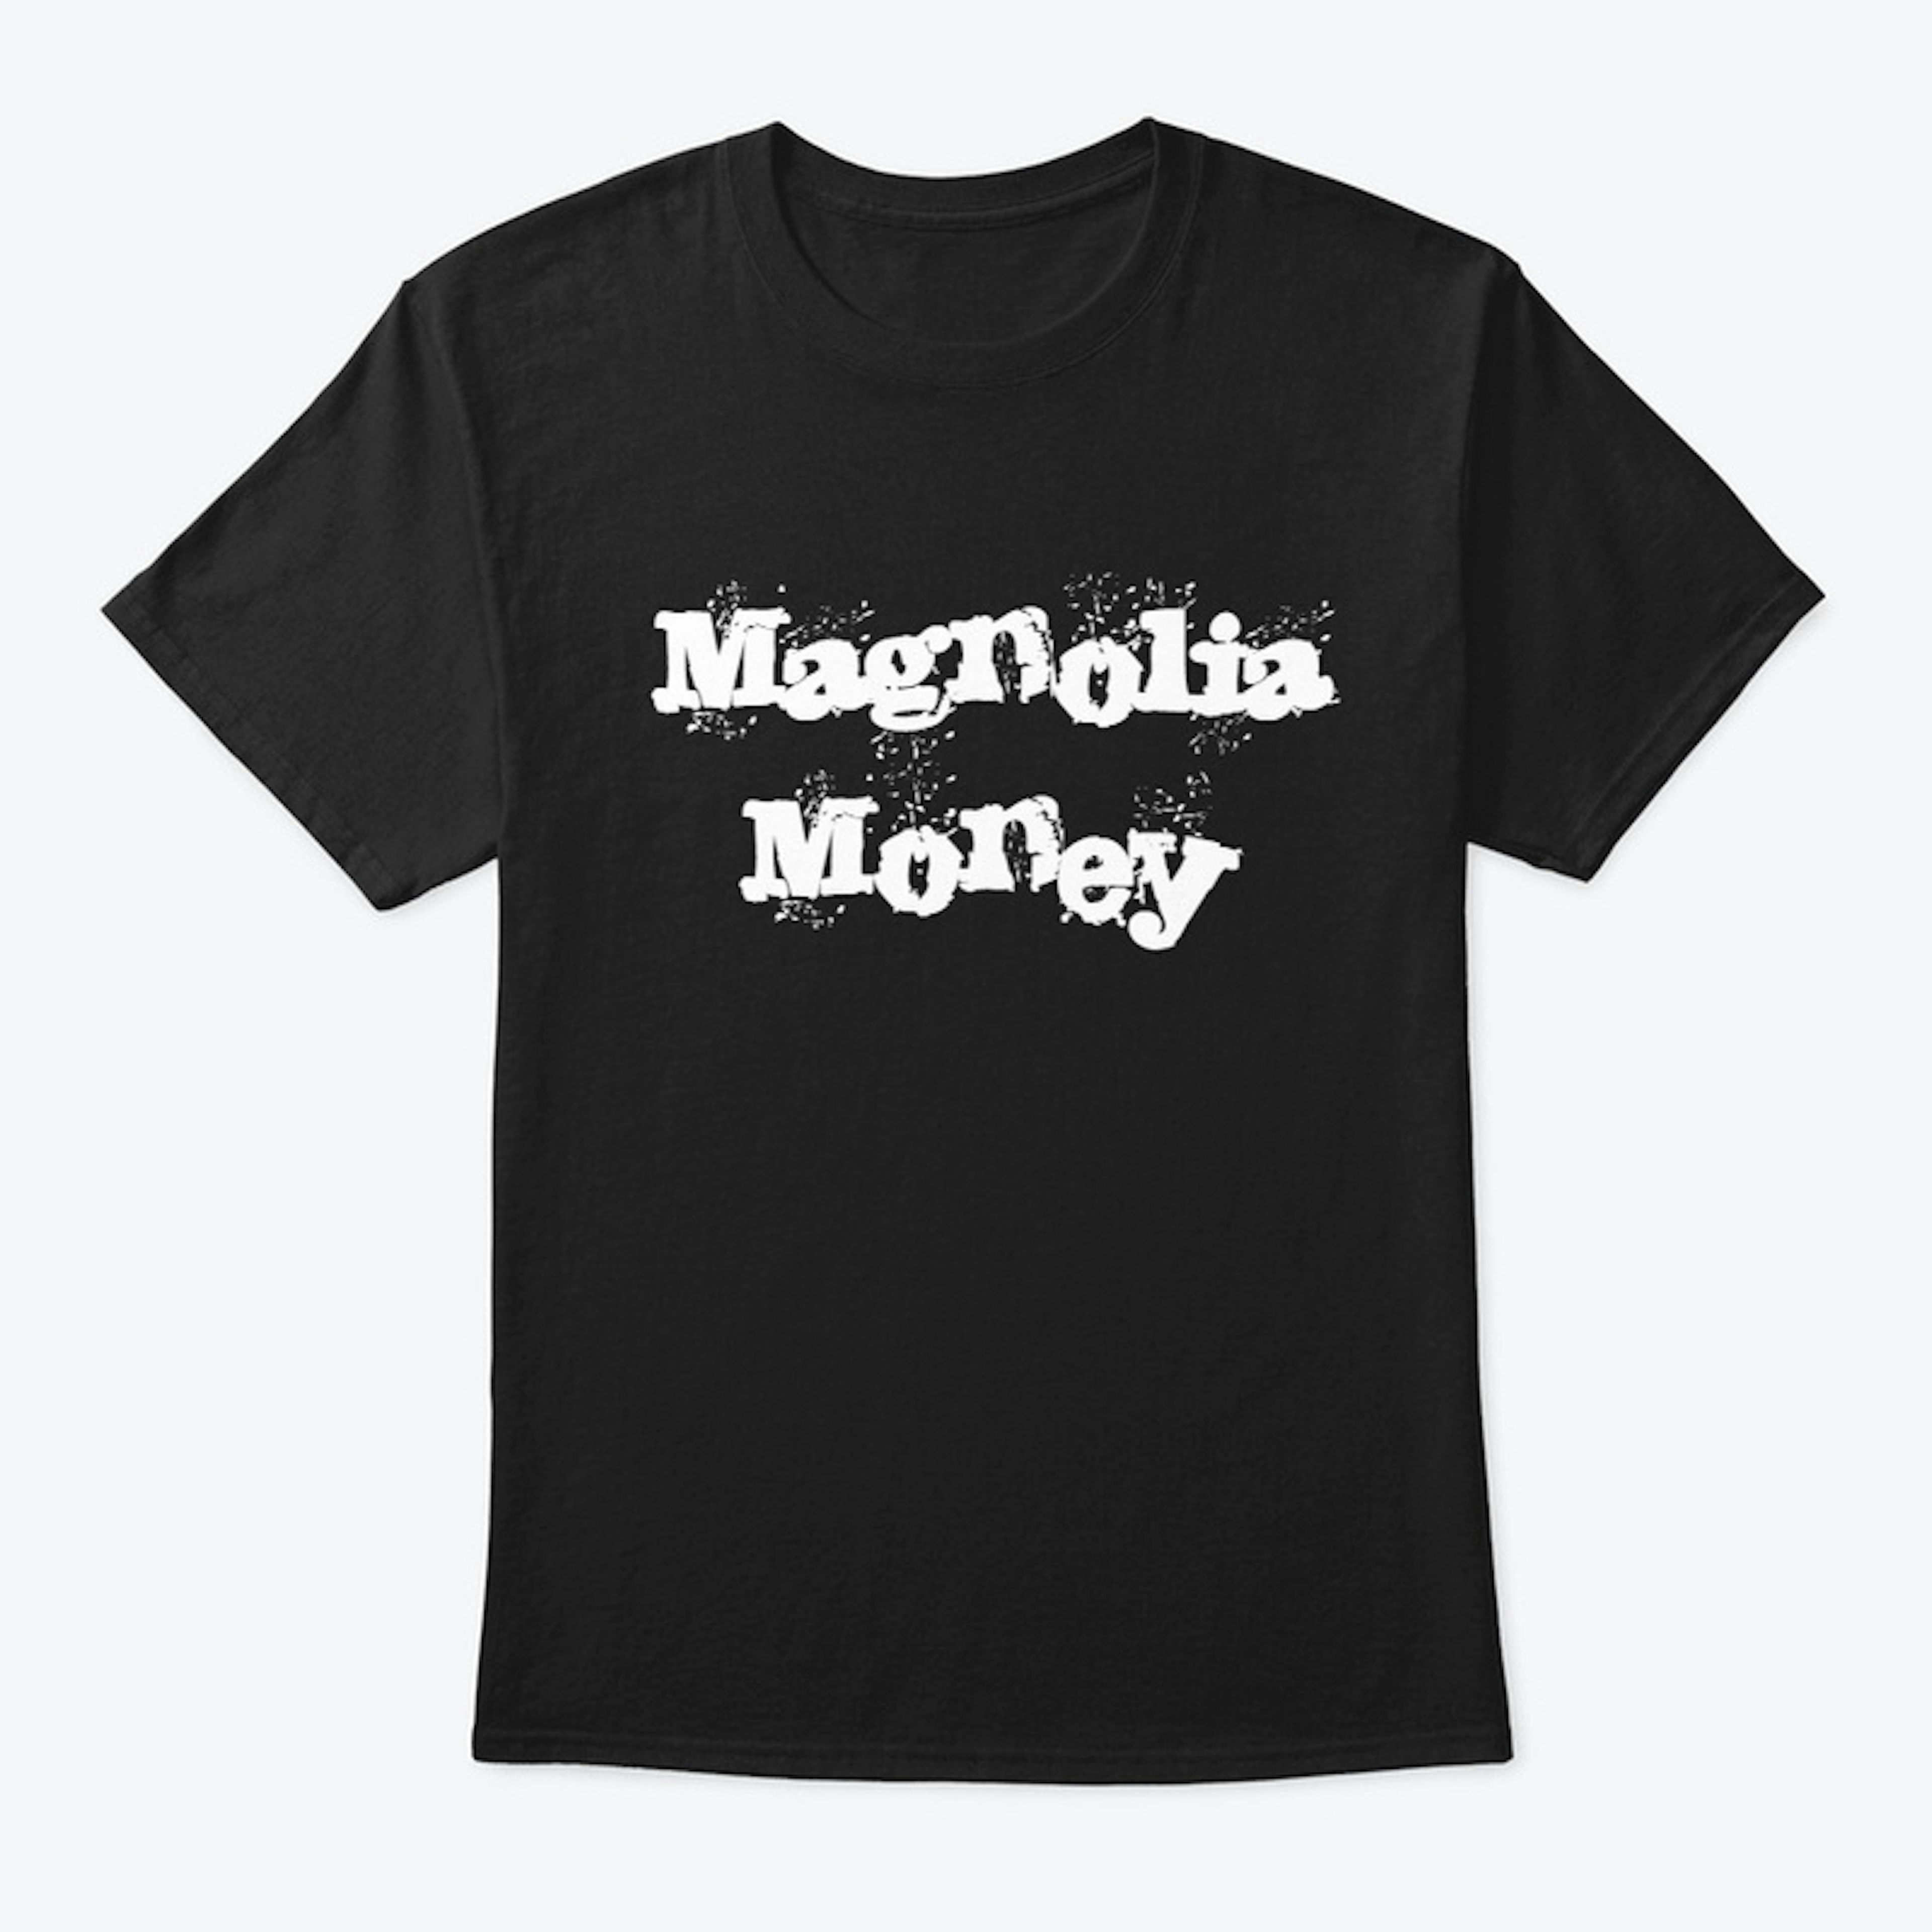 Later Y'all! Magnolia Money Shirt